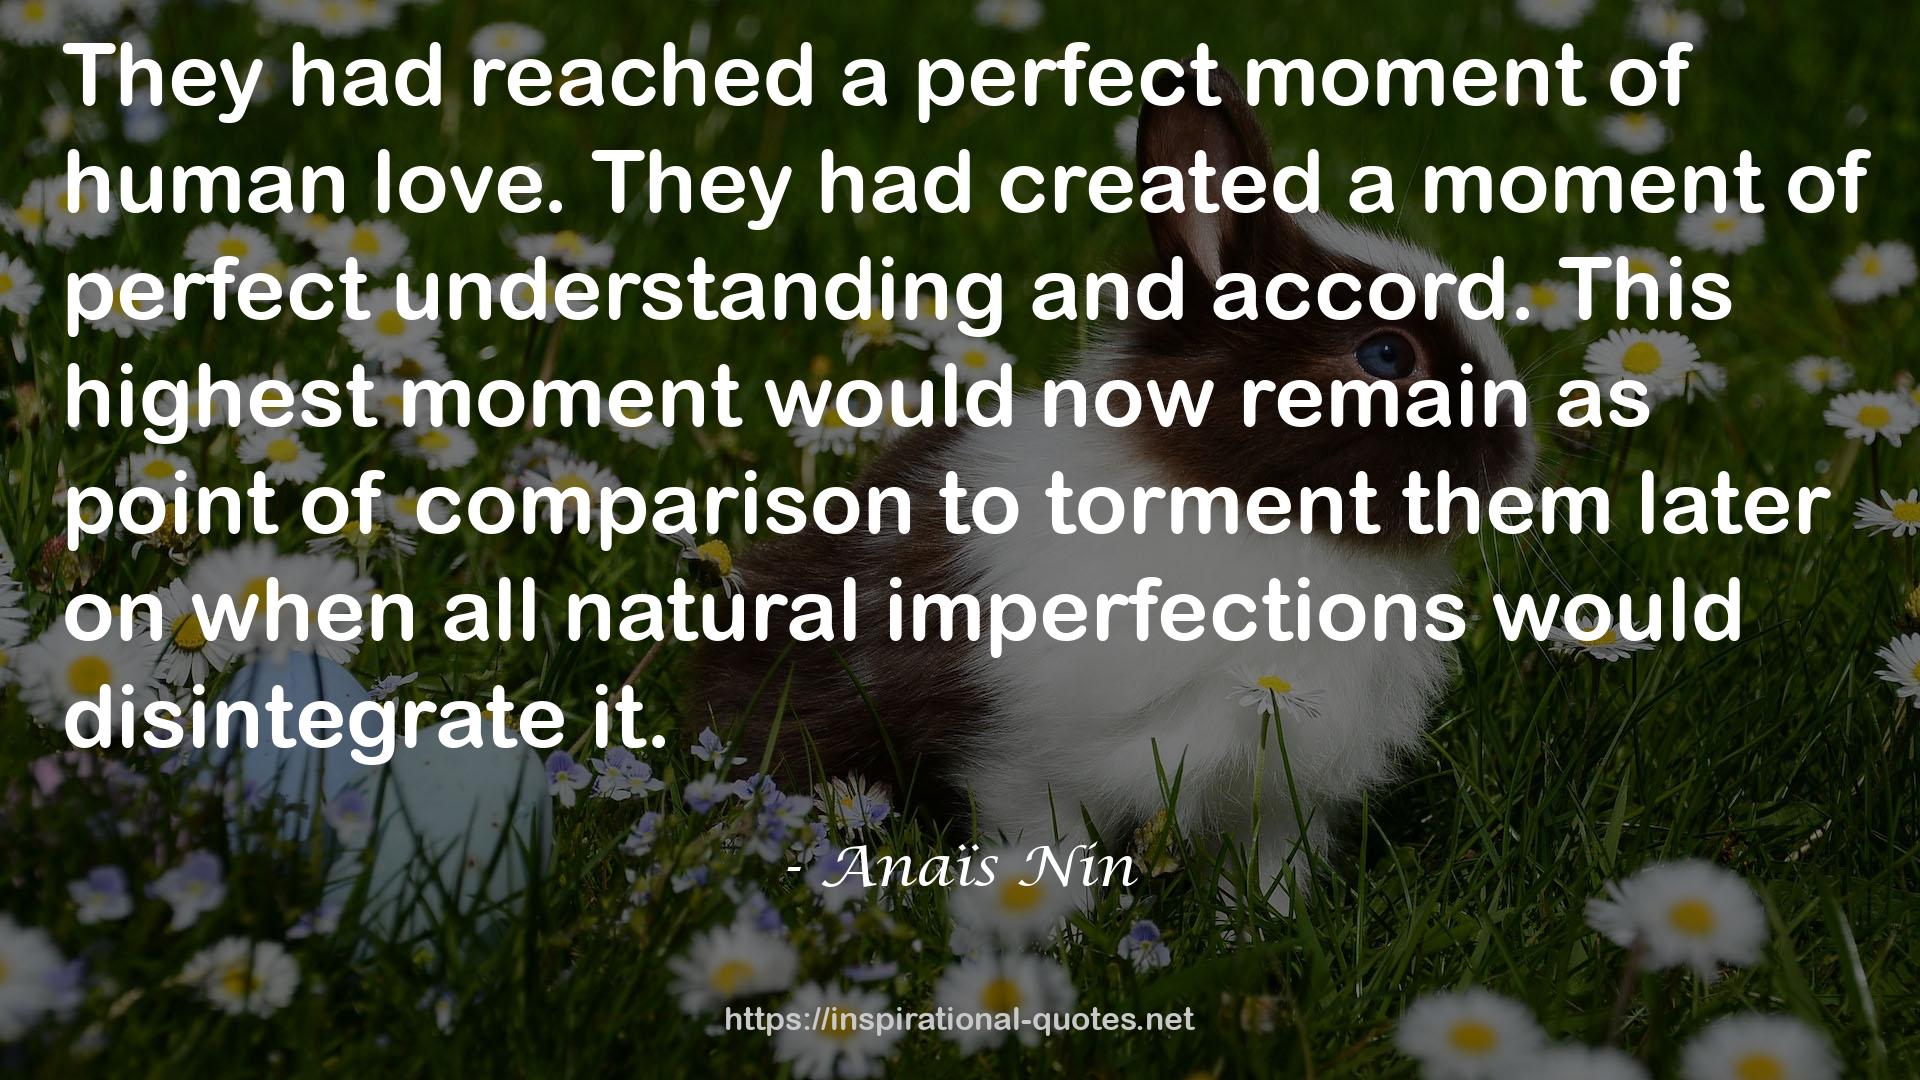 all natural imperfections  QUOTES